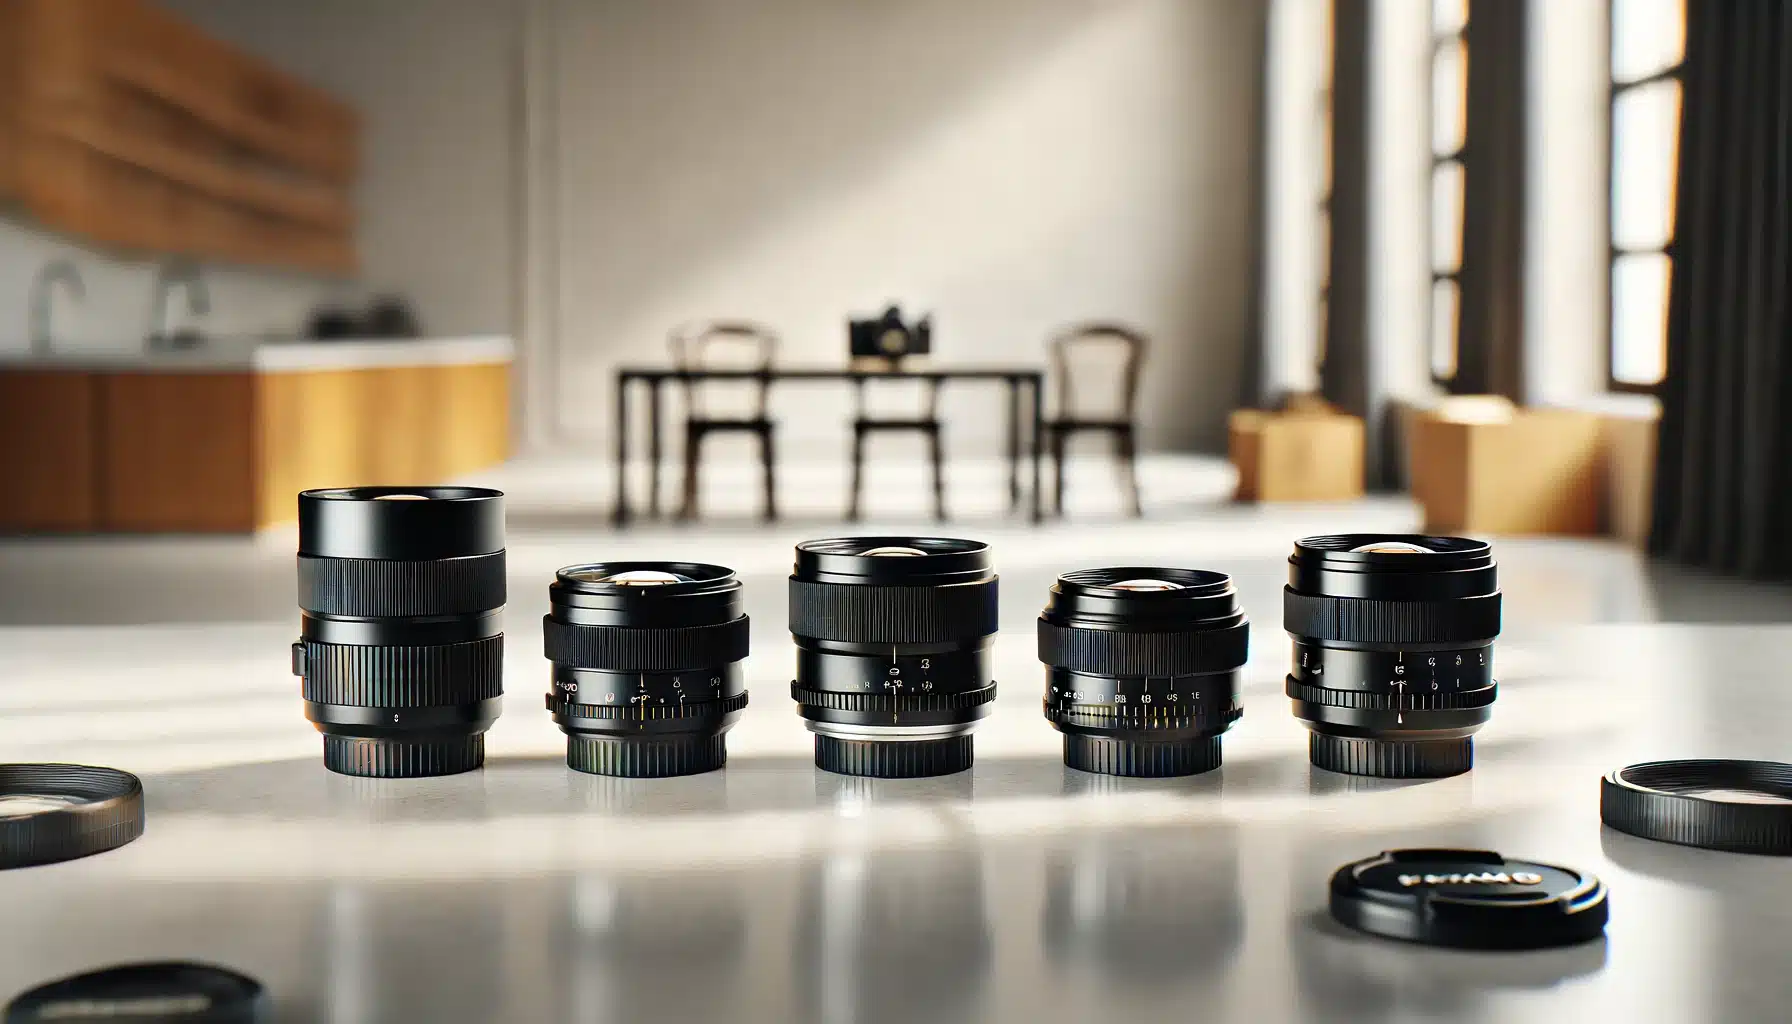 Close-up of five different 35mm camera lenses arranged neatly on a clean, minimalist surface. The lenses are of various brands and designs, with a simple and well-lit background.